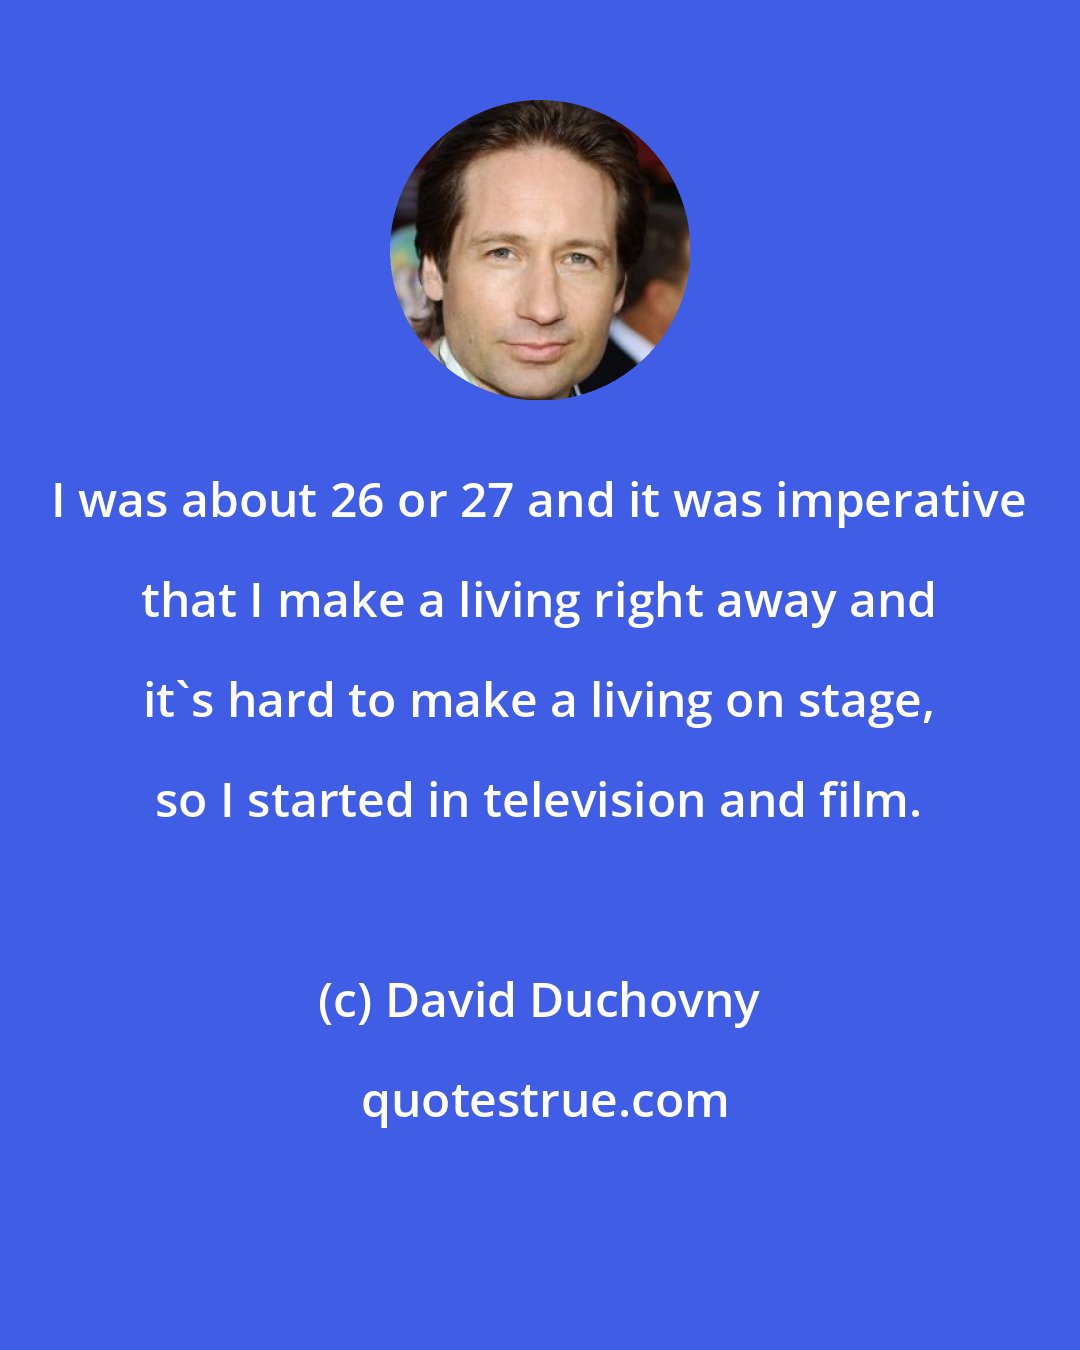 David Duchovny: I was about 26 or 27 and it was imperative that I make a living right away and it's hard to make a living on stage, so I started in television and film.